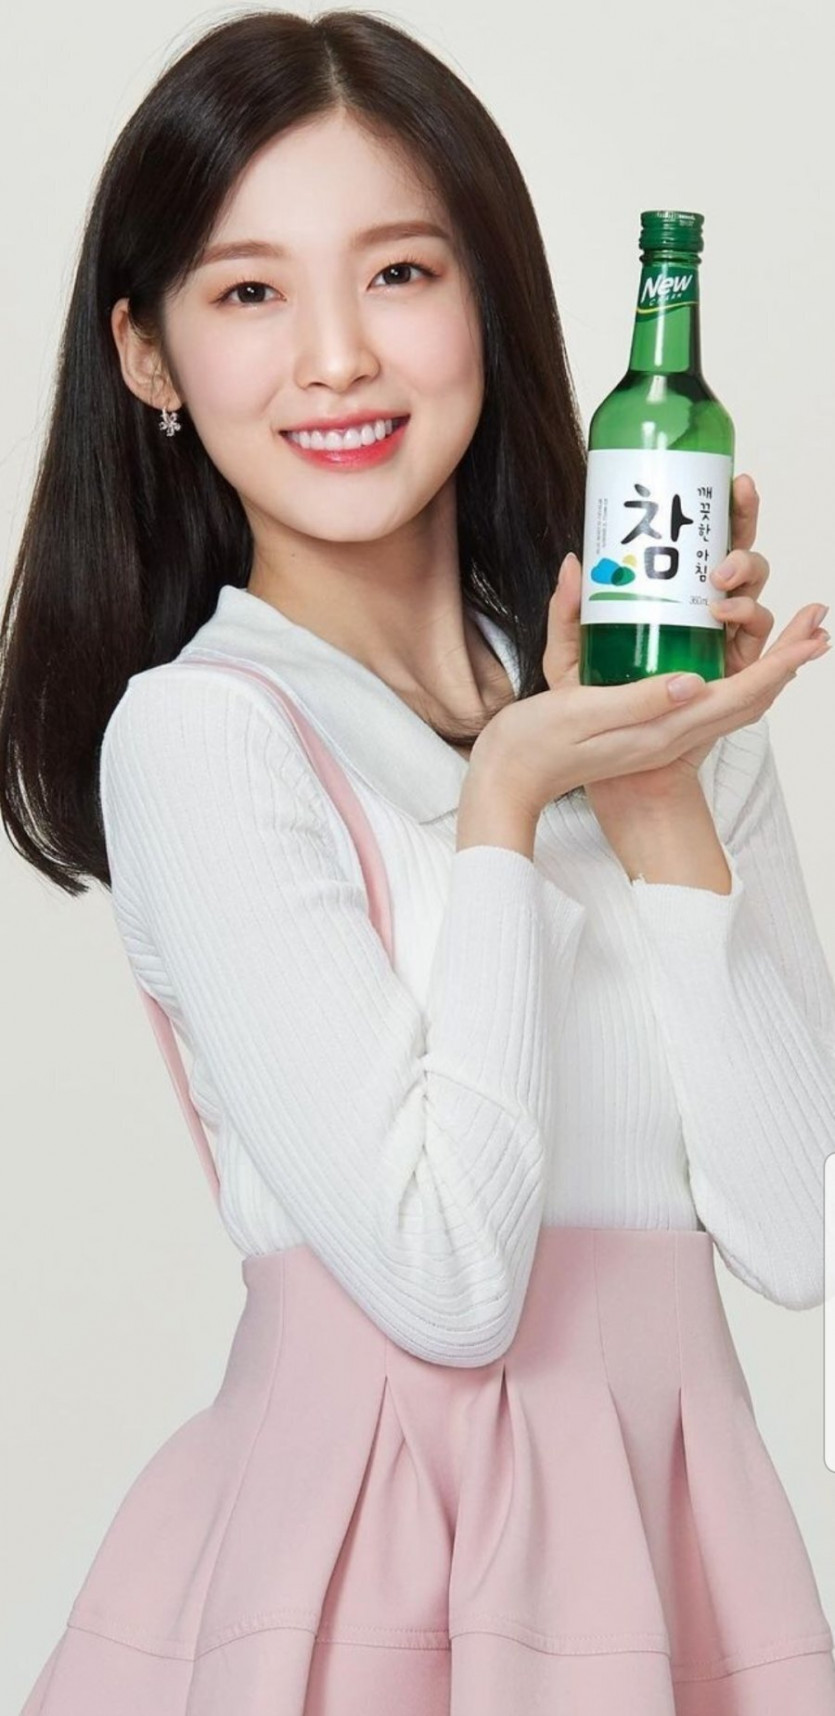 Arin's Soju commercial looks so healthy.